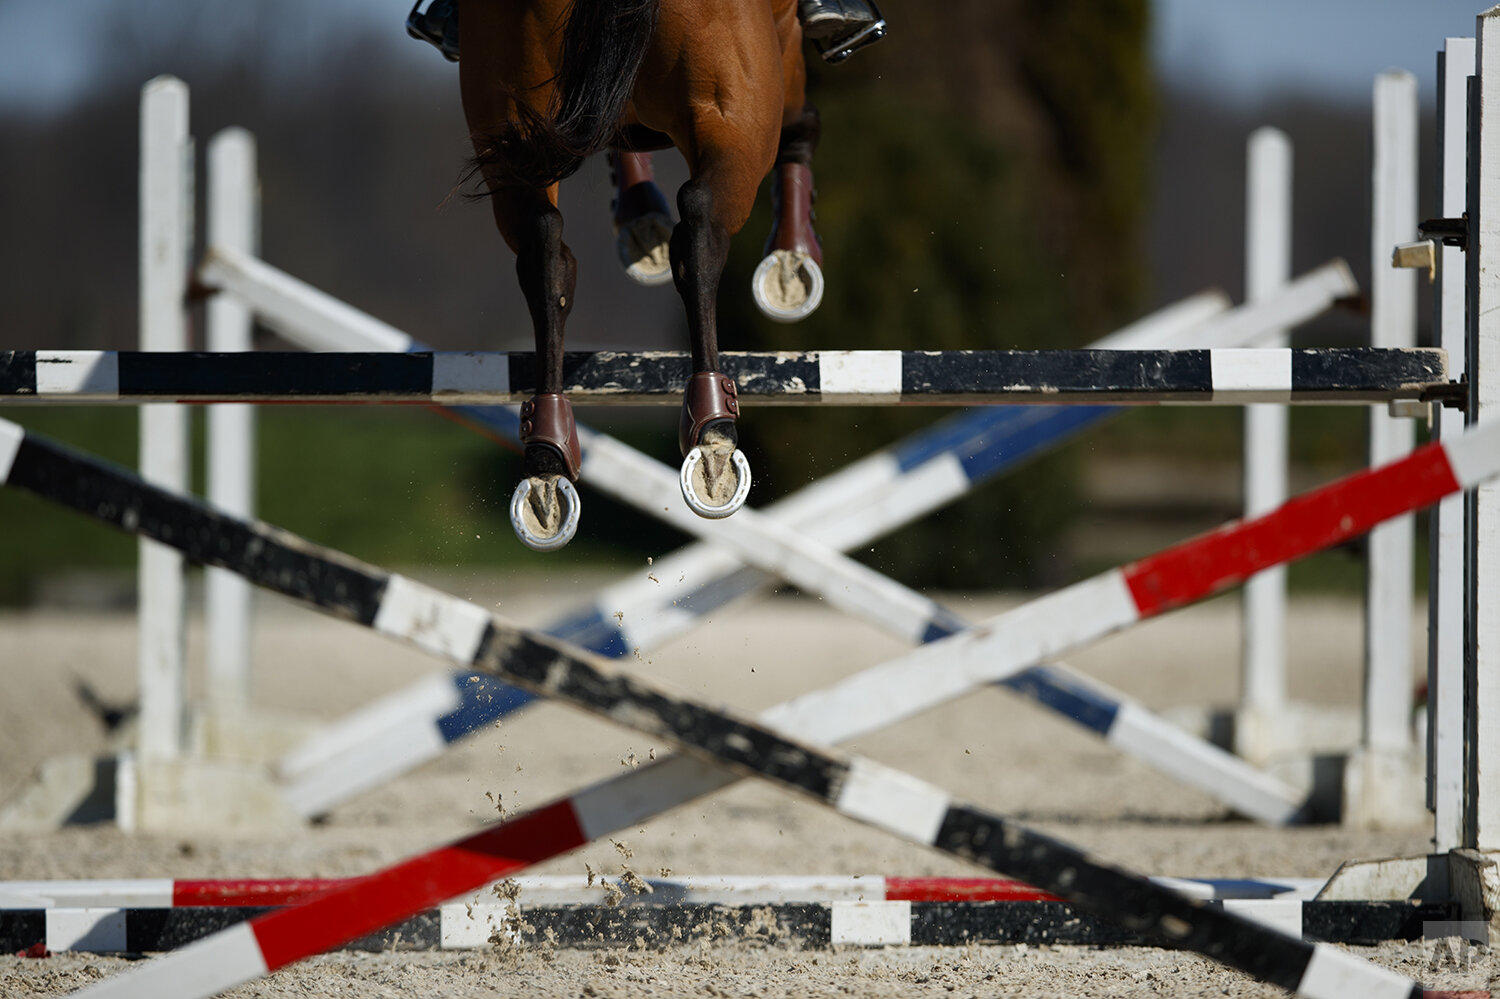  Fernhill Singapore, ridden by Phillip Dutton, a medal-winning equestrian on the U.S. Olympic team, leaps through a series of jumps during a training session, Thursday, April 2, 2020, in West Grove, Pa. (AP Photo/Matt Slocum) 